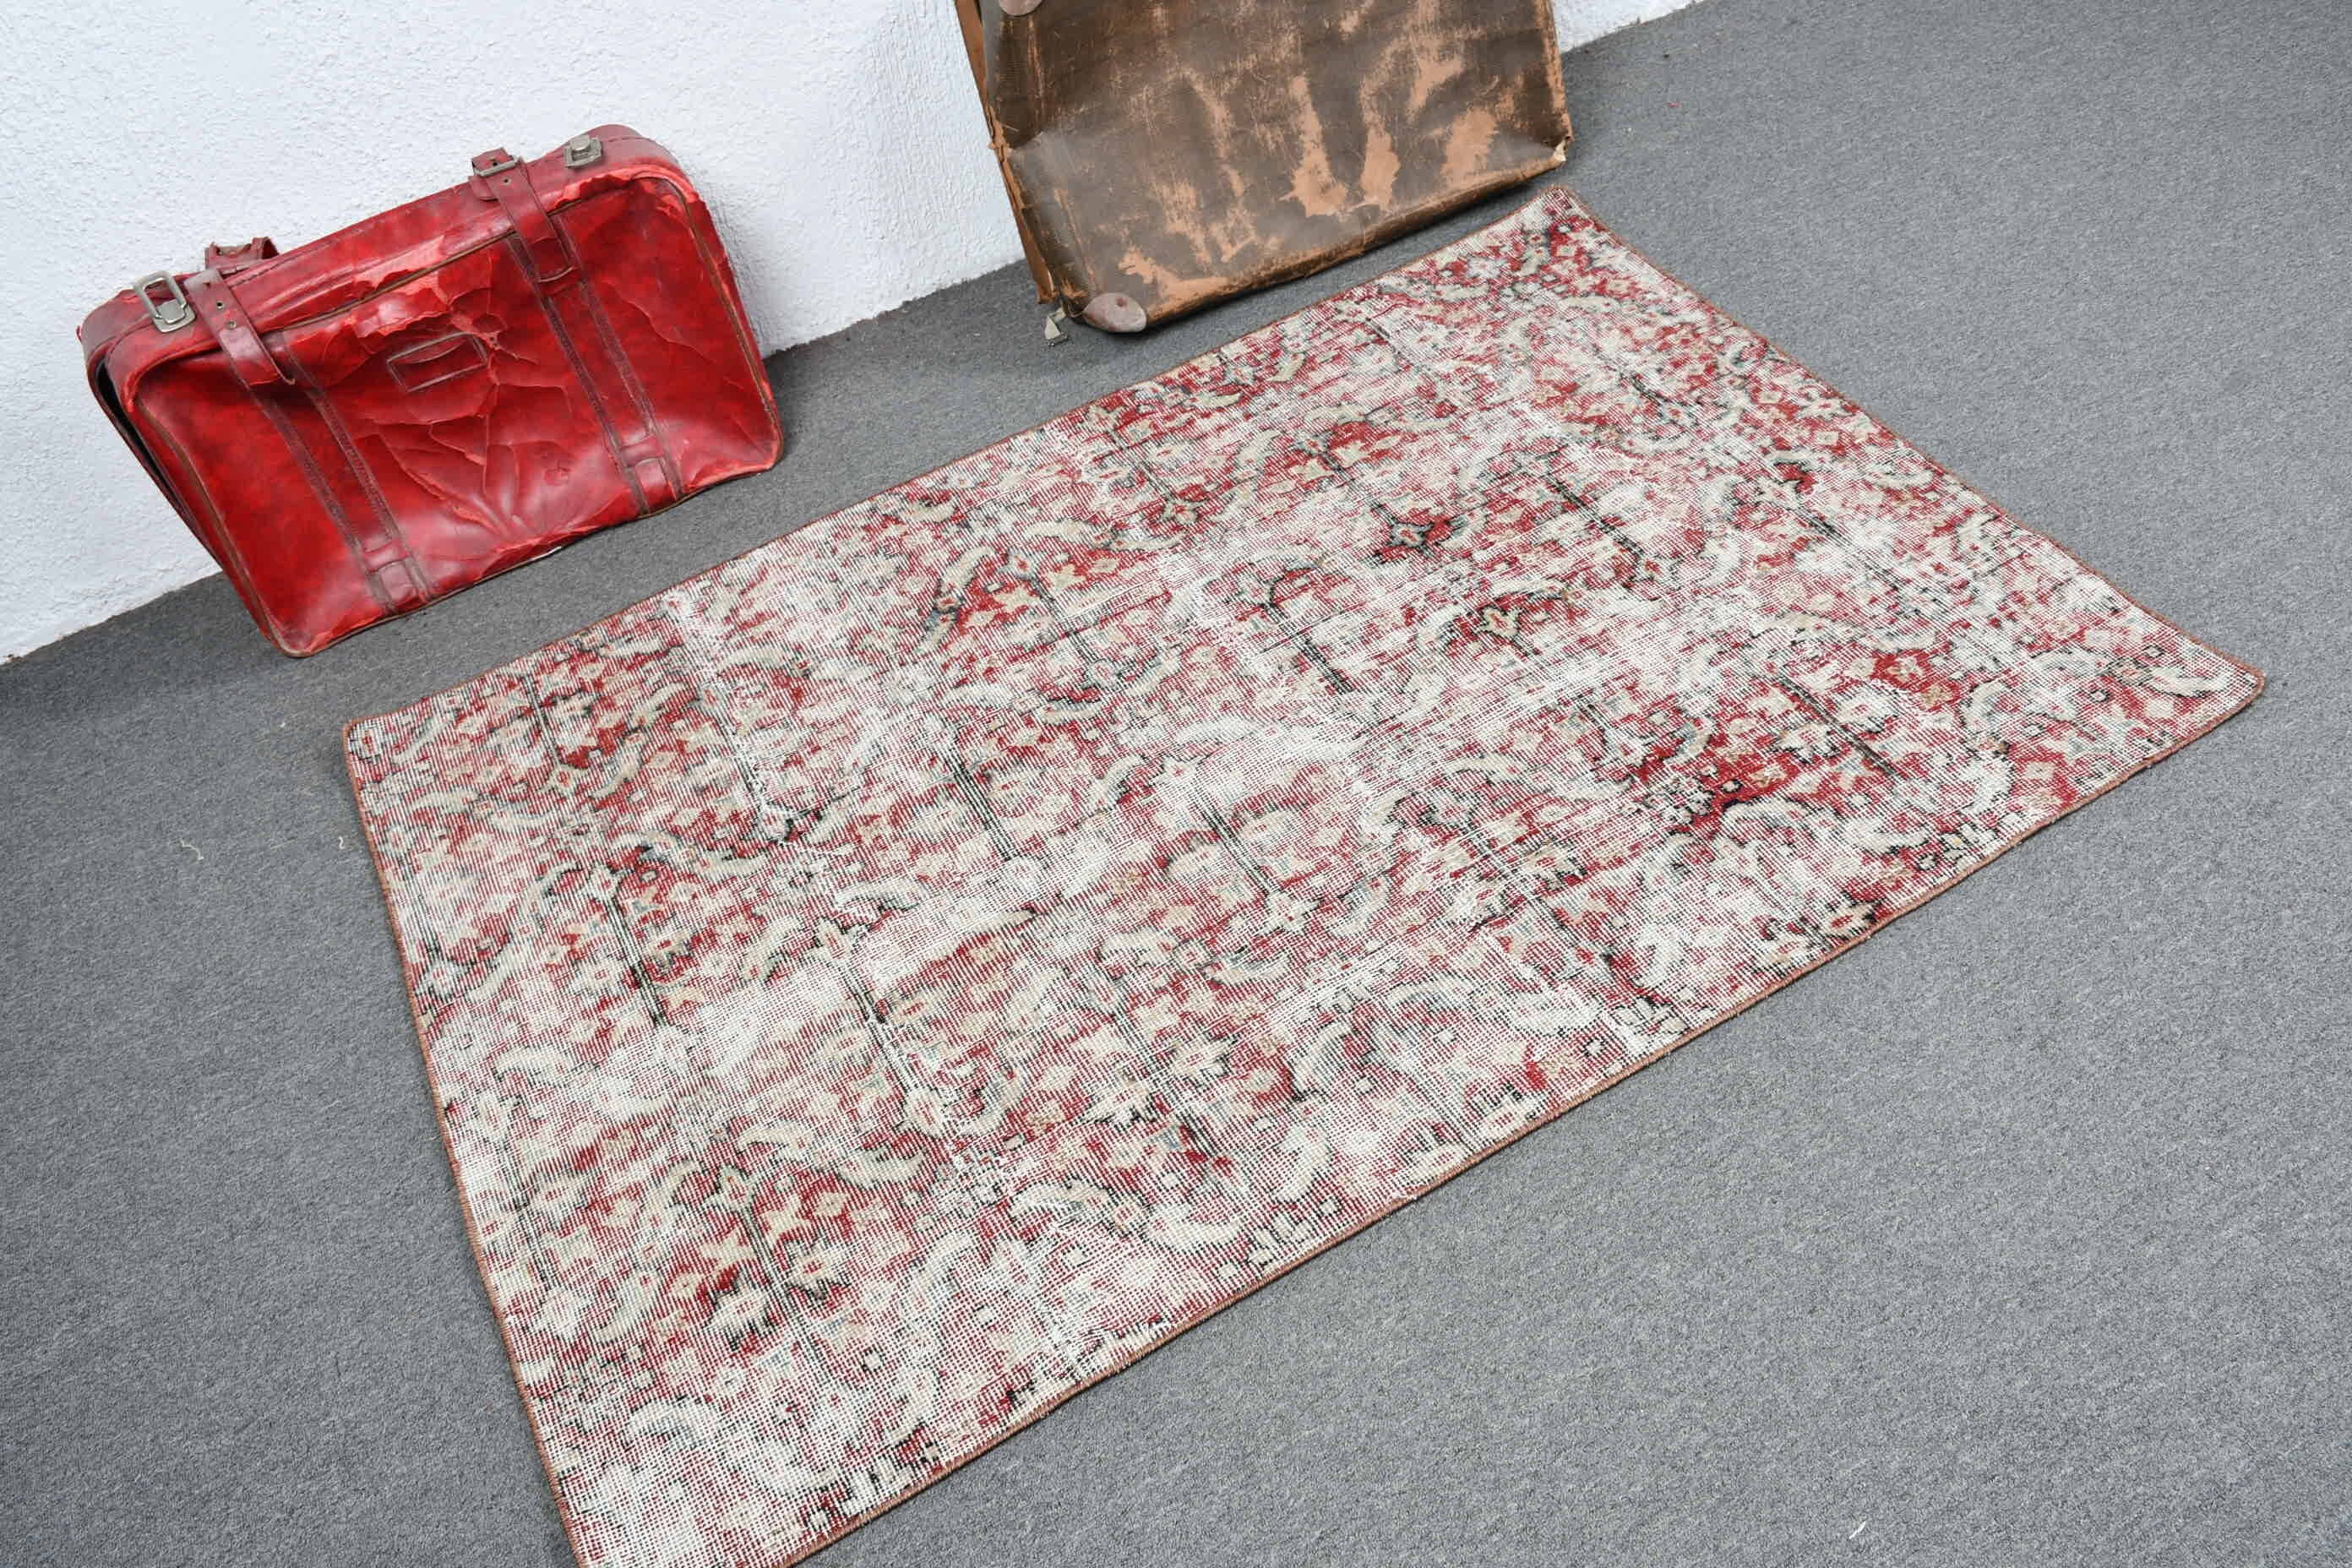 Turkish Rugs, Oushak Rugs, Moroccan Rugs, Vintage Rugs, Bedroom Rugs, Red Wool Rug, Entry Rug, Rugs for Kitchen, 3.6x5.4 ft Accent Rug